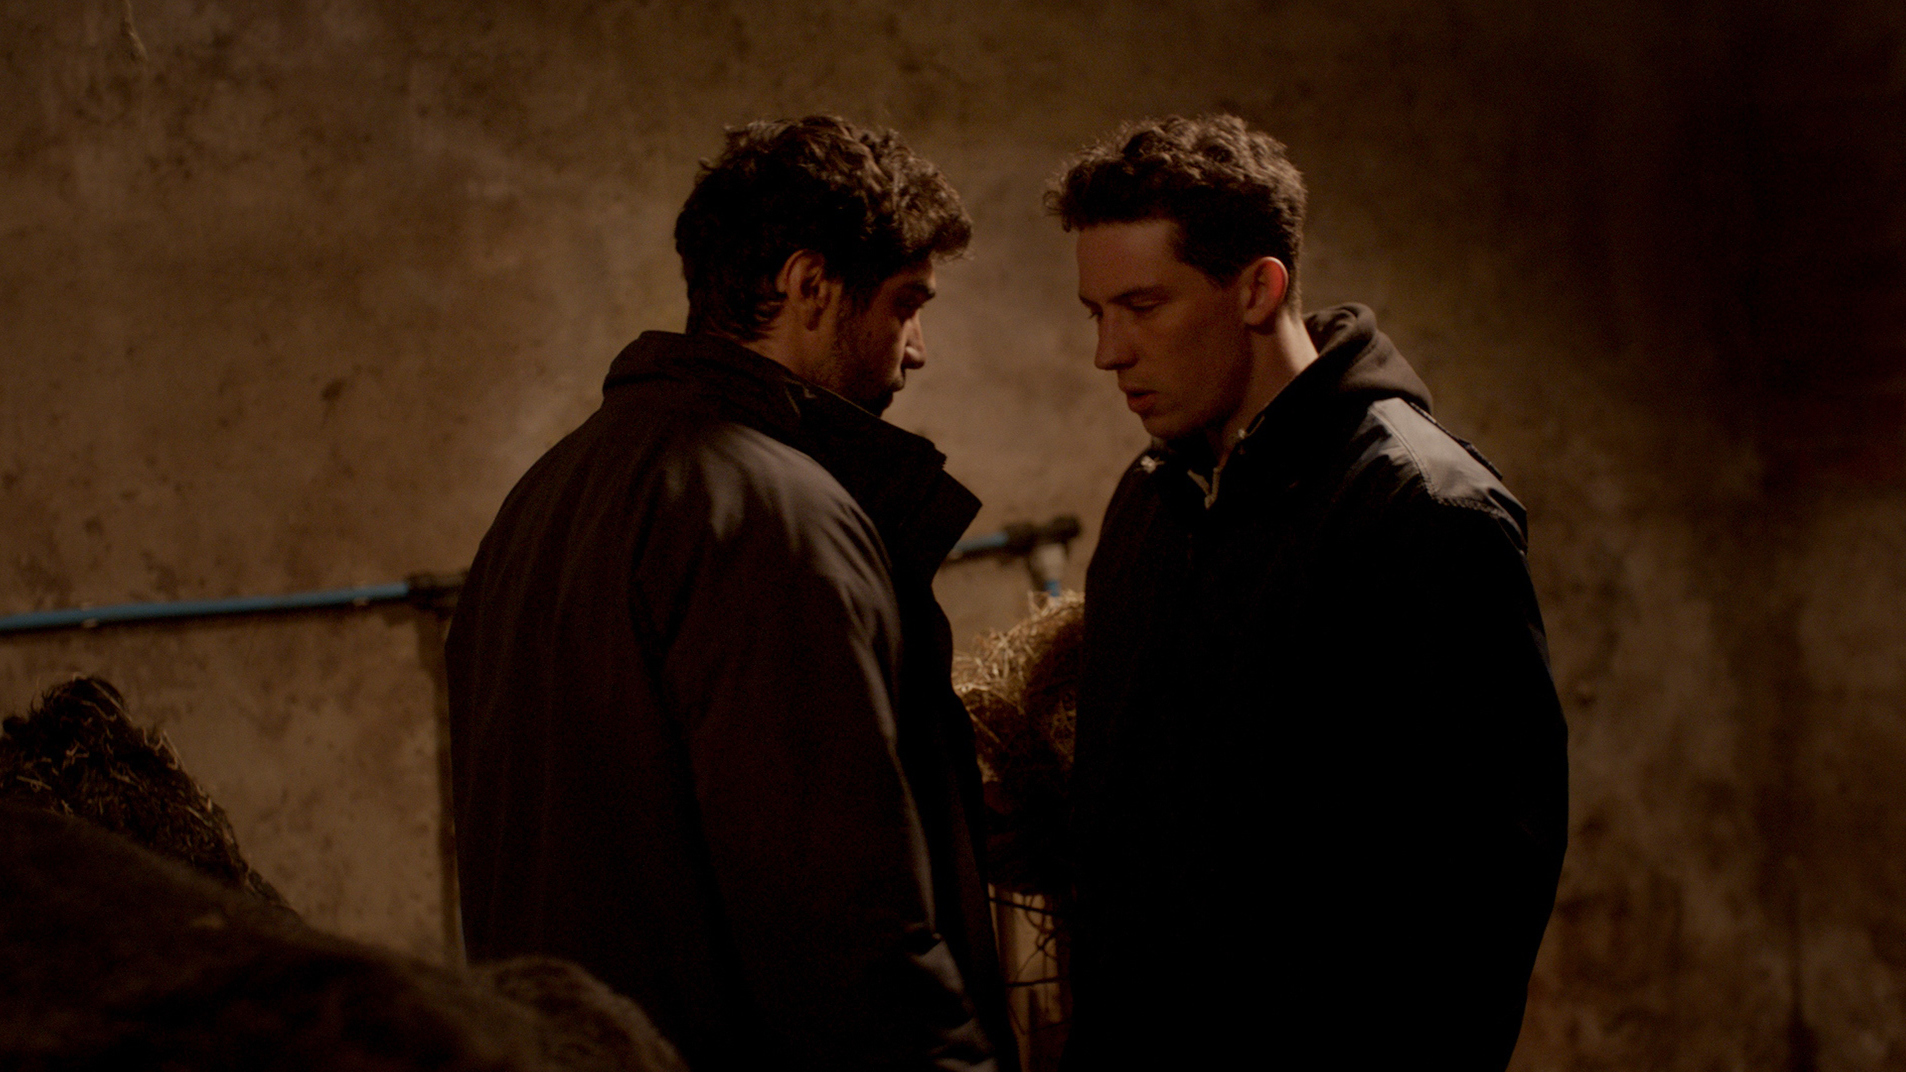 In God's Own Country, two ranch hands (Alec Secareanu and Josh O'Connor) find love on a Yorkshire sheep farm.